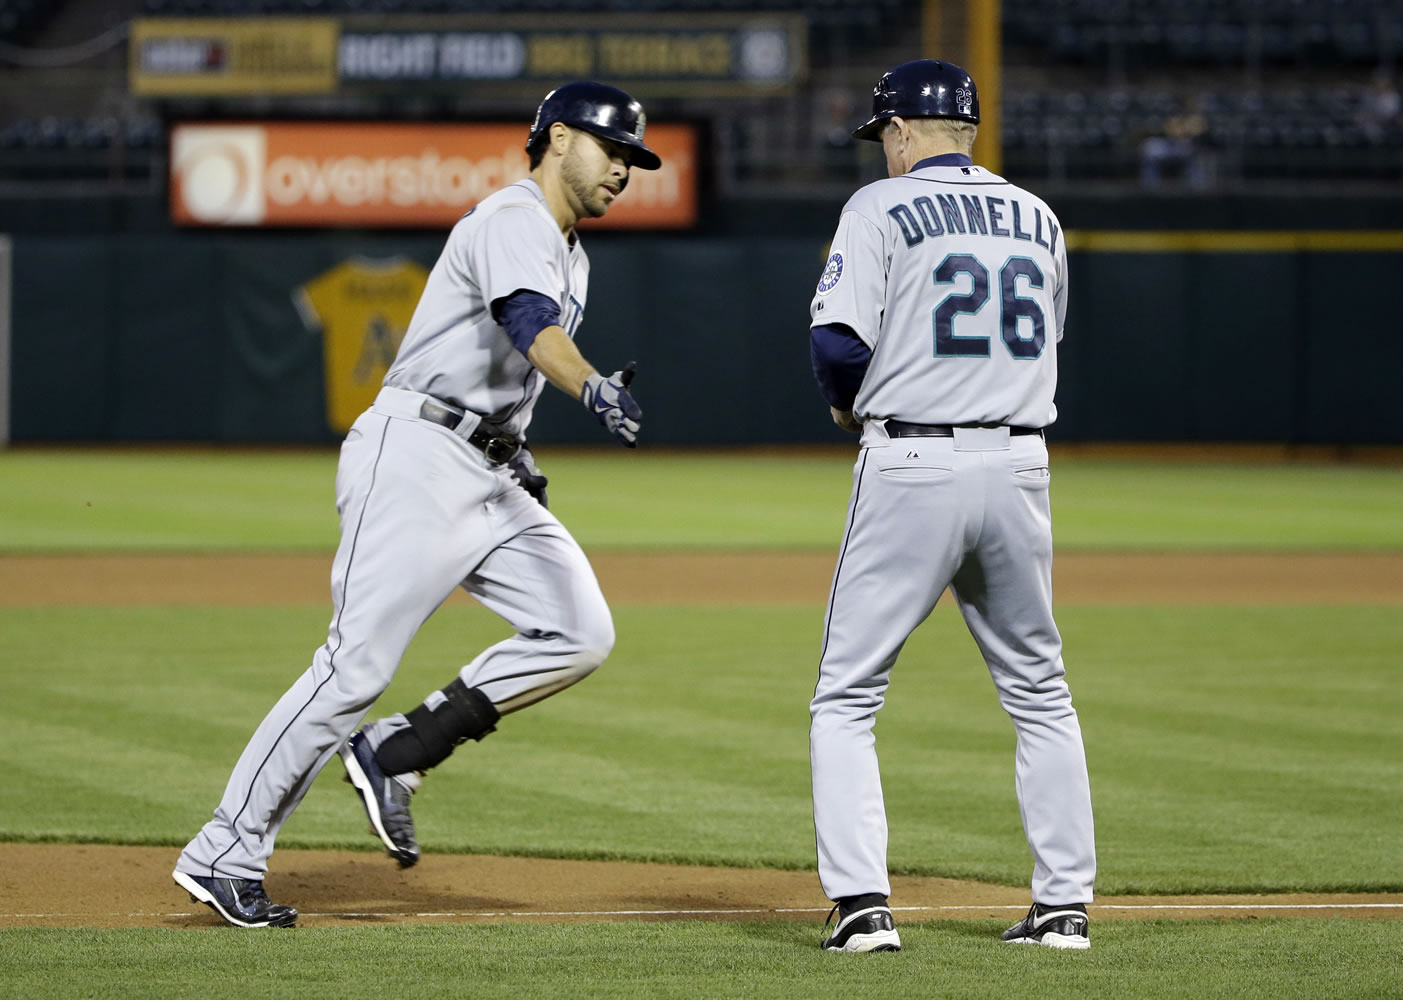 Seattle Mariners' Stefen Romero, left, shakes hands with third base coach Rich Donnelly after Romero's solo home run against the Oakland Athletics during the fifth inning of a baseball game on Monday, May 5, 2014, in Oakland, Calif.